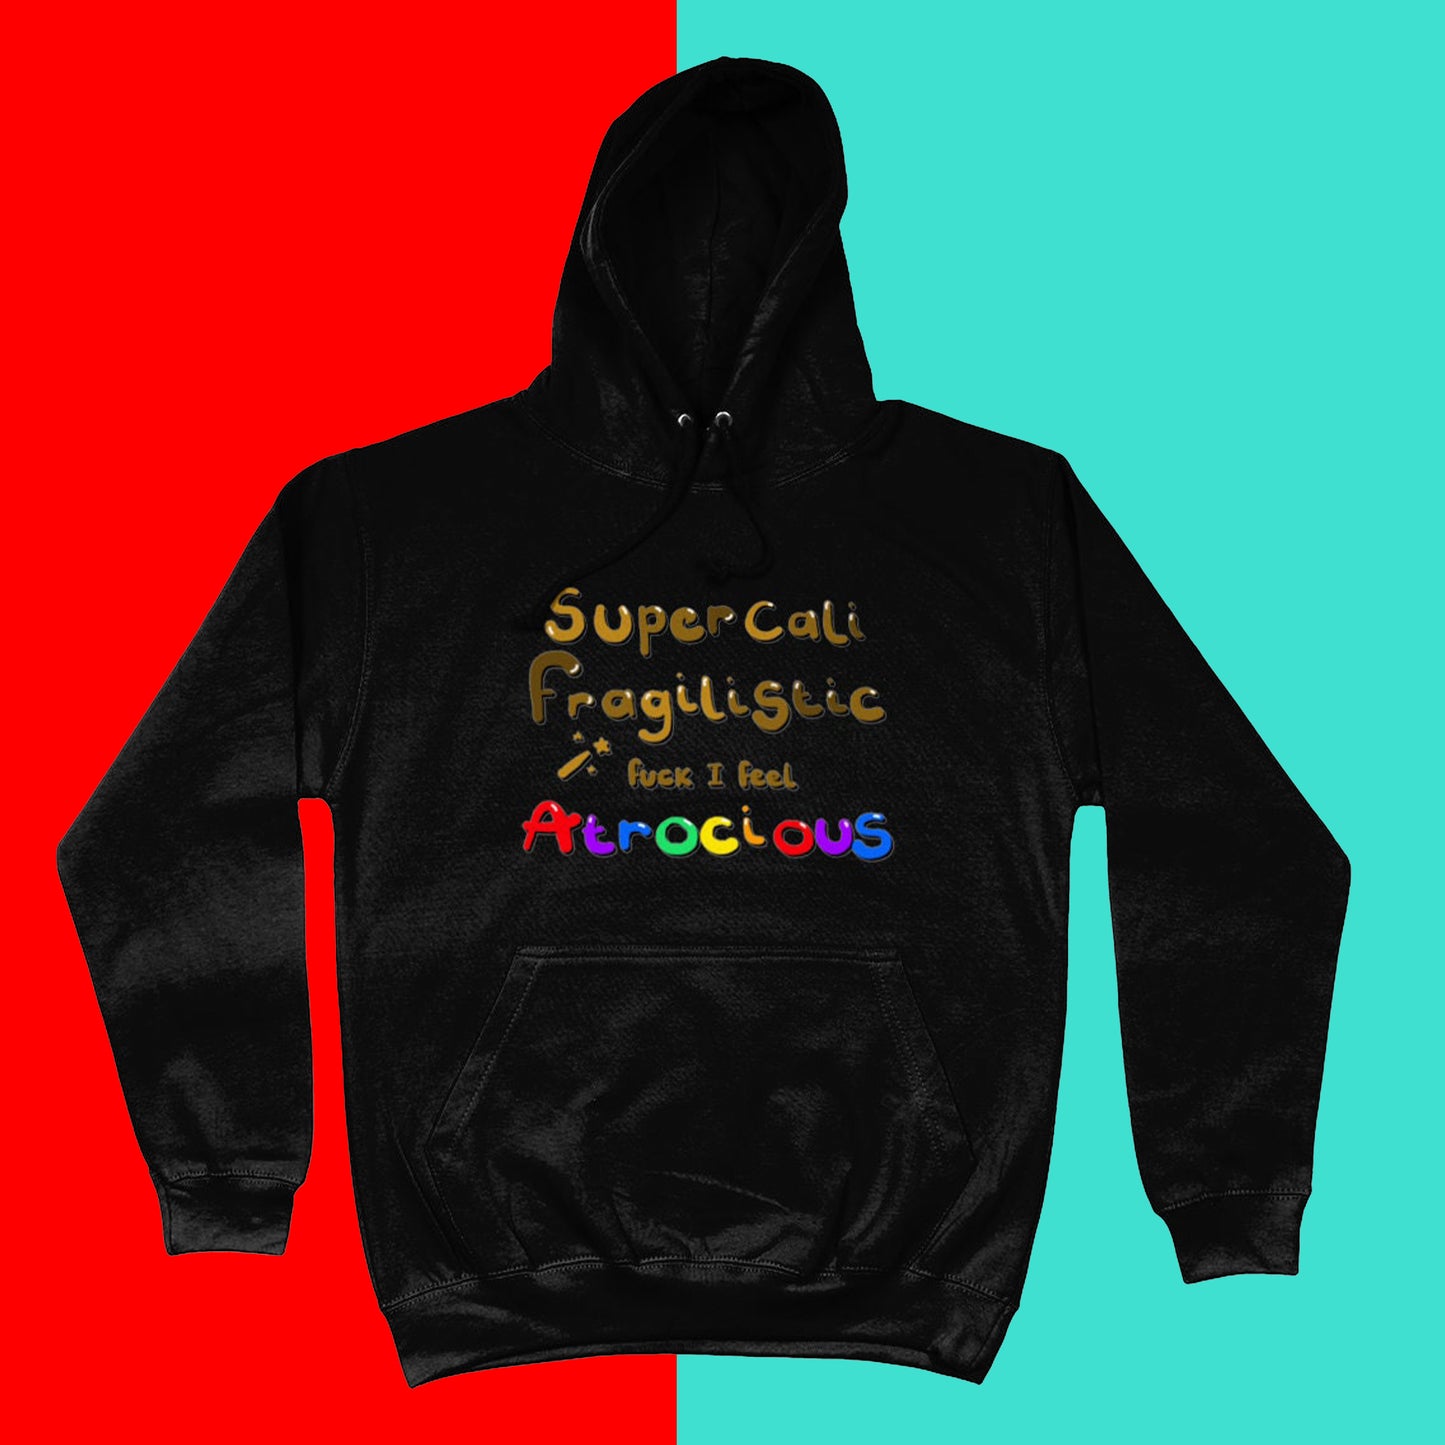 I Feel Atrocious Hoodie on a blue and red background. The black hoodie has gold text on it that says 'supercali fragilistic f*** I feel' and then 'atrocious' in rainbow coloured text. Design to raise awareness for chronic illness